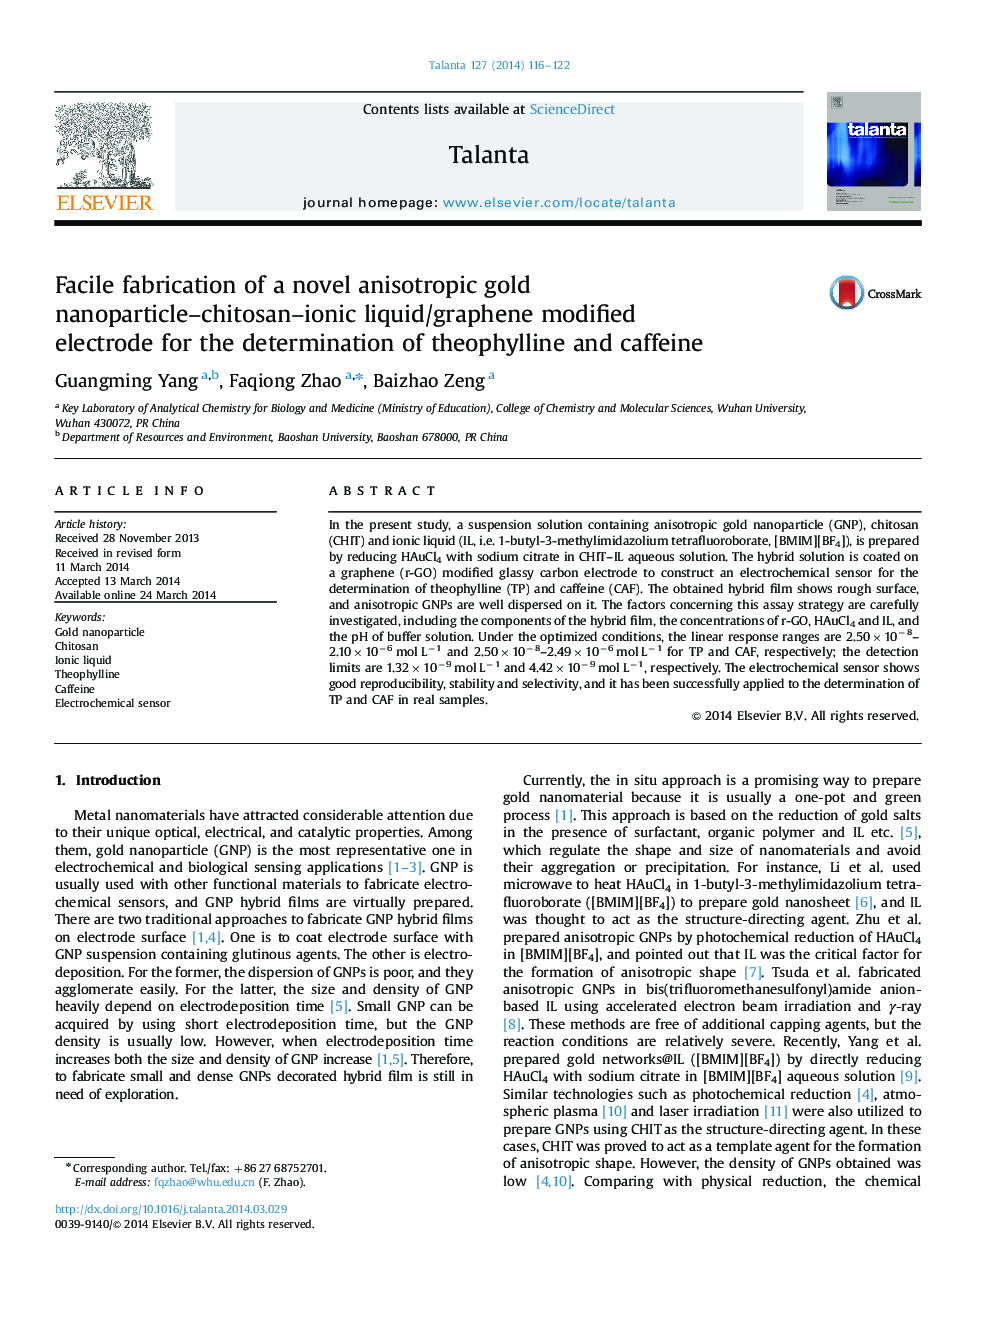 Facile fabrication of a novel anisotropic gold nanoparticle-chitosan-ionic liquid/graphene modified electrode for the determination of theophylline and caffeine